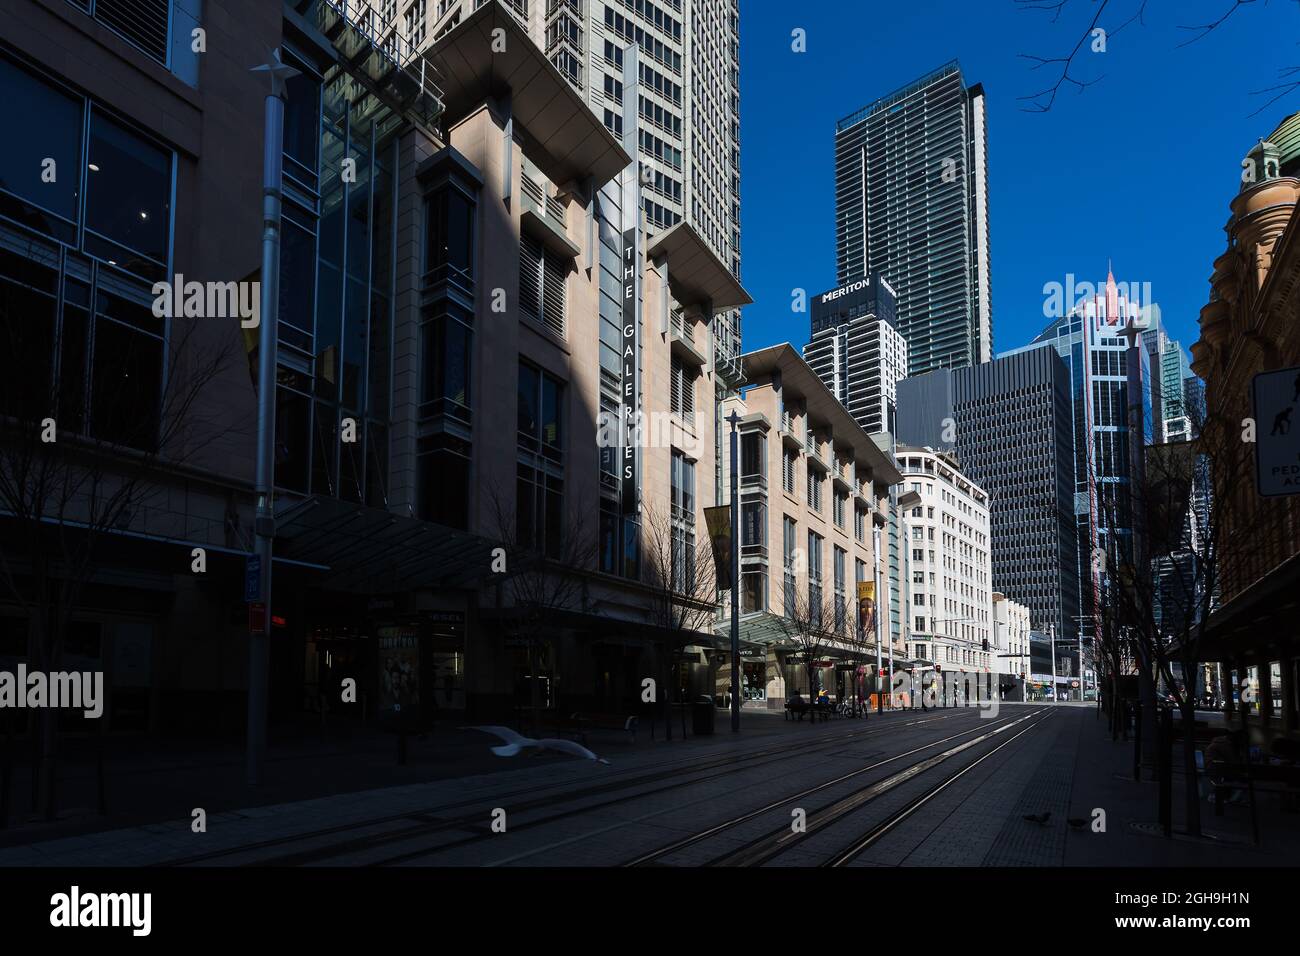 Sydney, Australia. Monday 6th September 2021. The Sydney central business district looking very deserted as the lockdown continues in Sydney due to the Delta strain of COVID-19.George Street, Sydney. Credit: Paul Lovelace/Alamy Live News Stock Photo